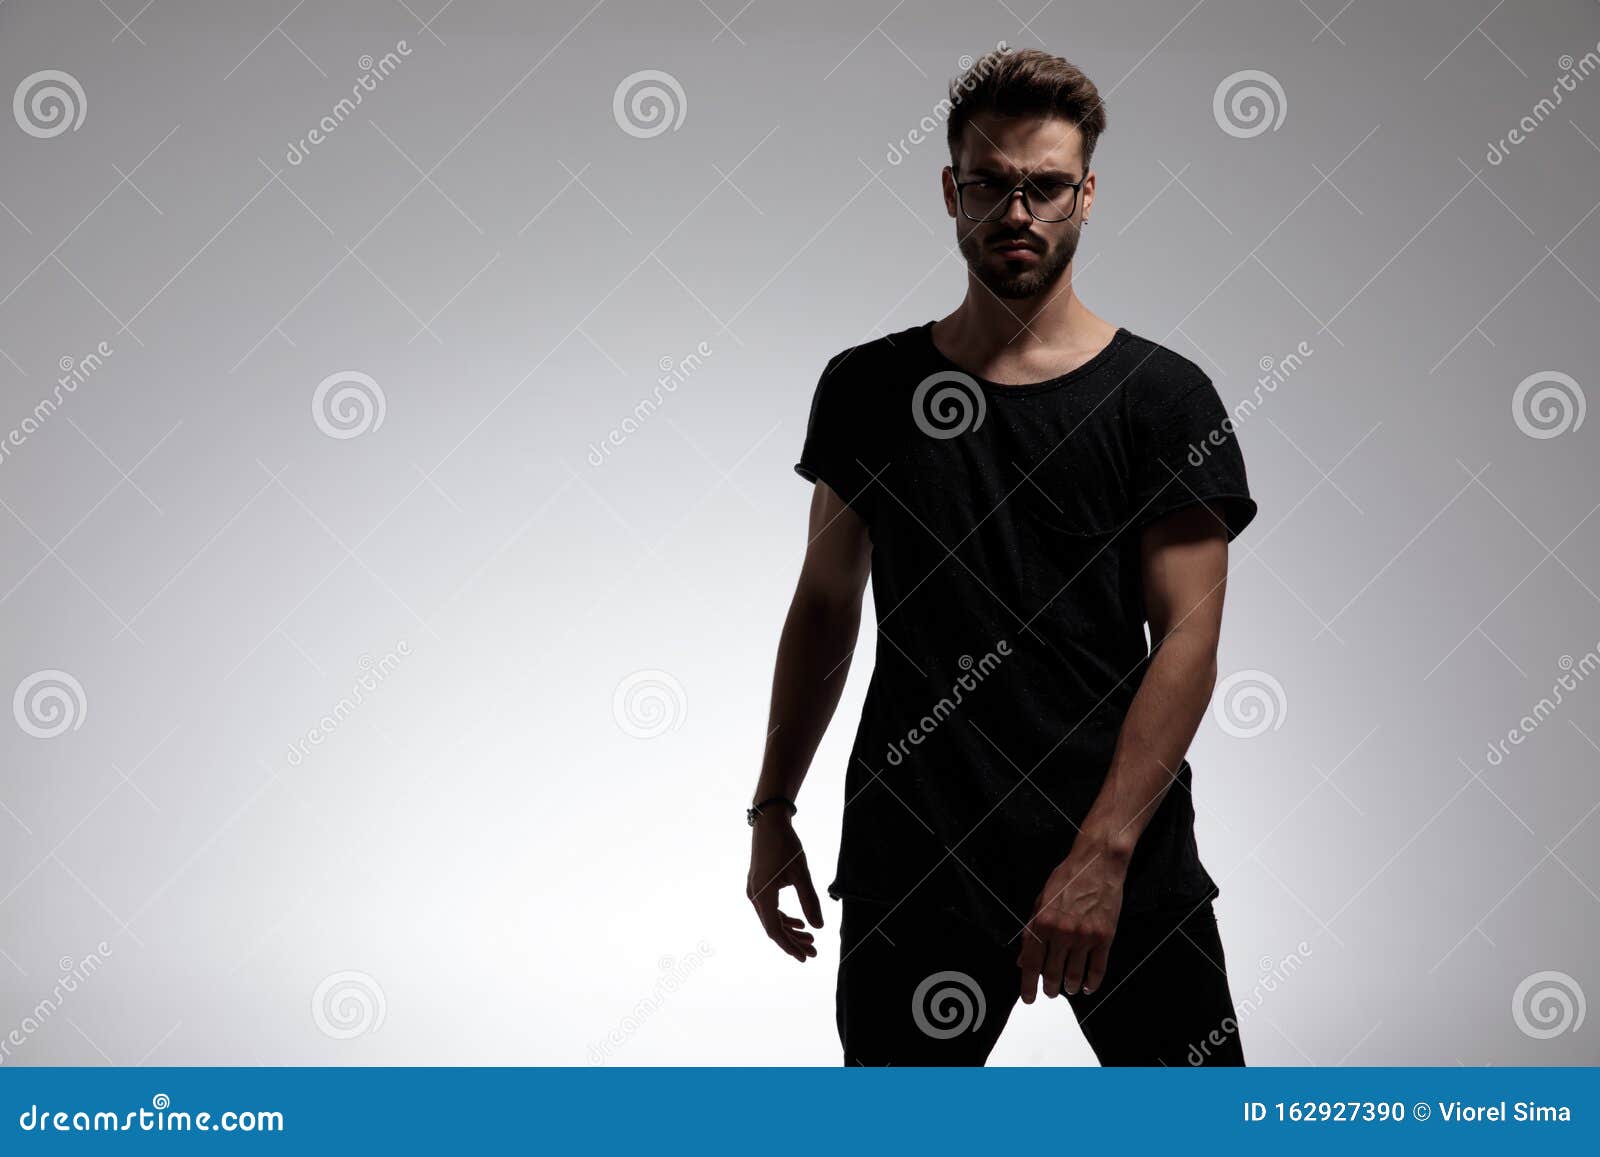 Dramatic Cool Guy Wearing Glasses and Standing in Fashion Pose Stock ...